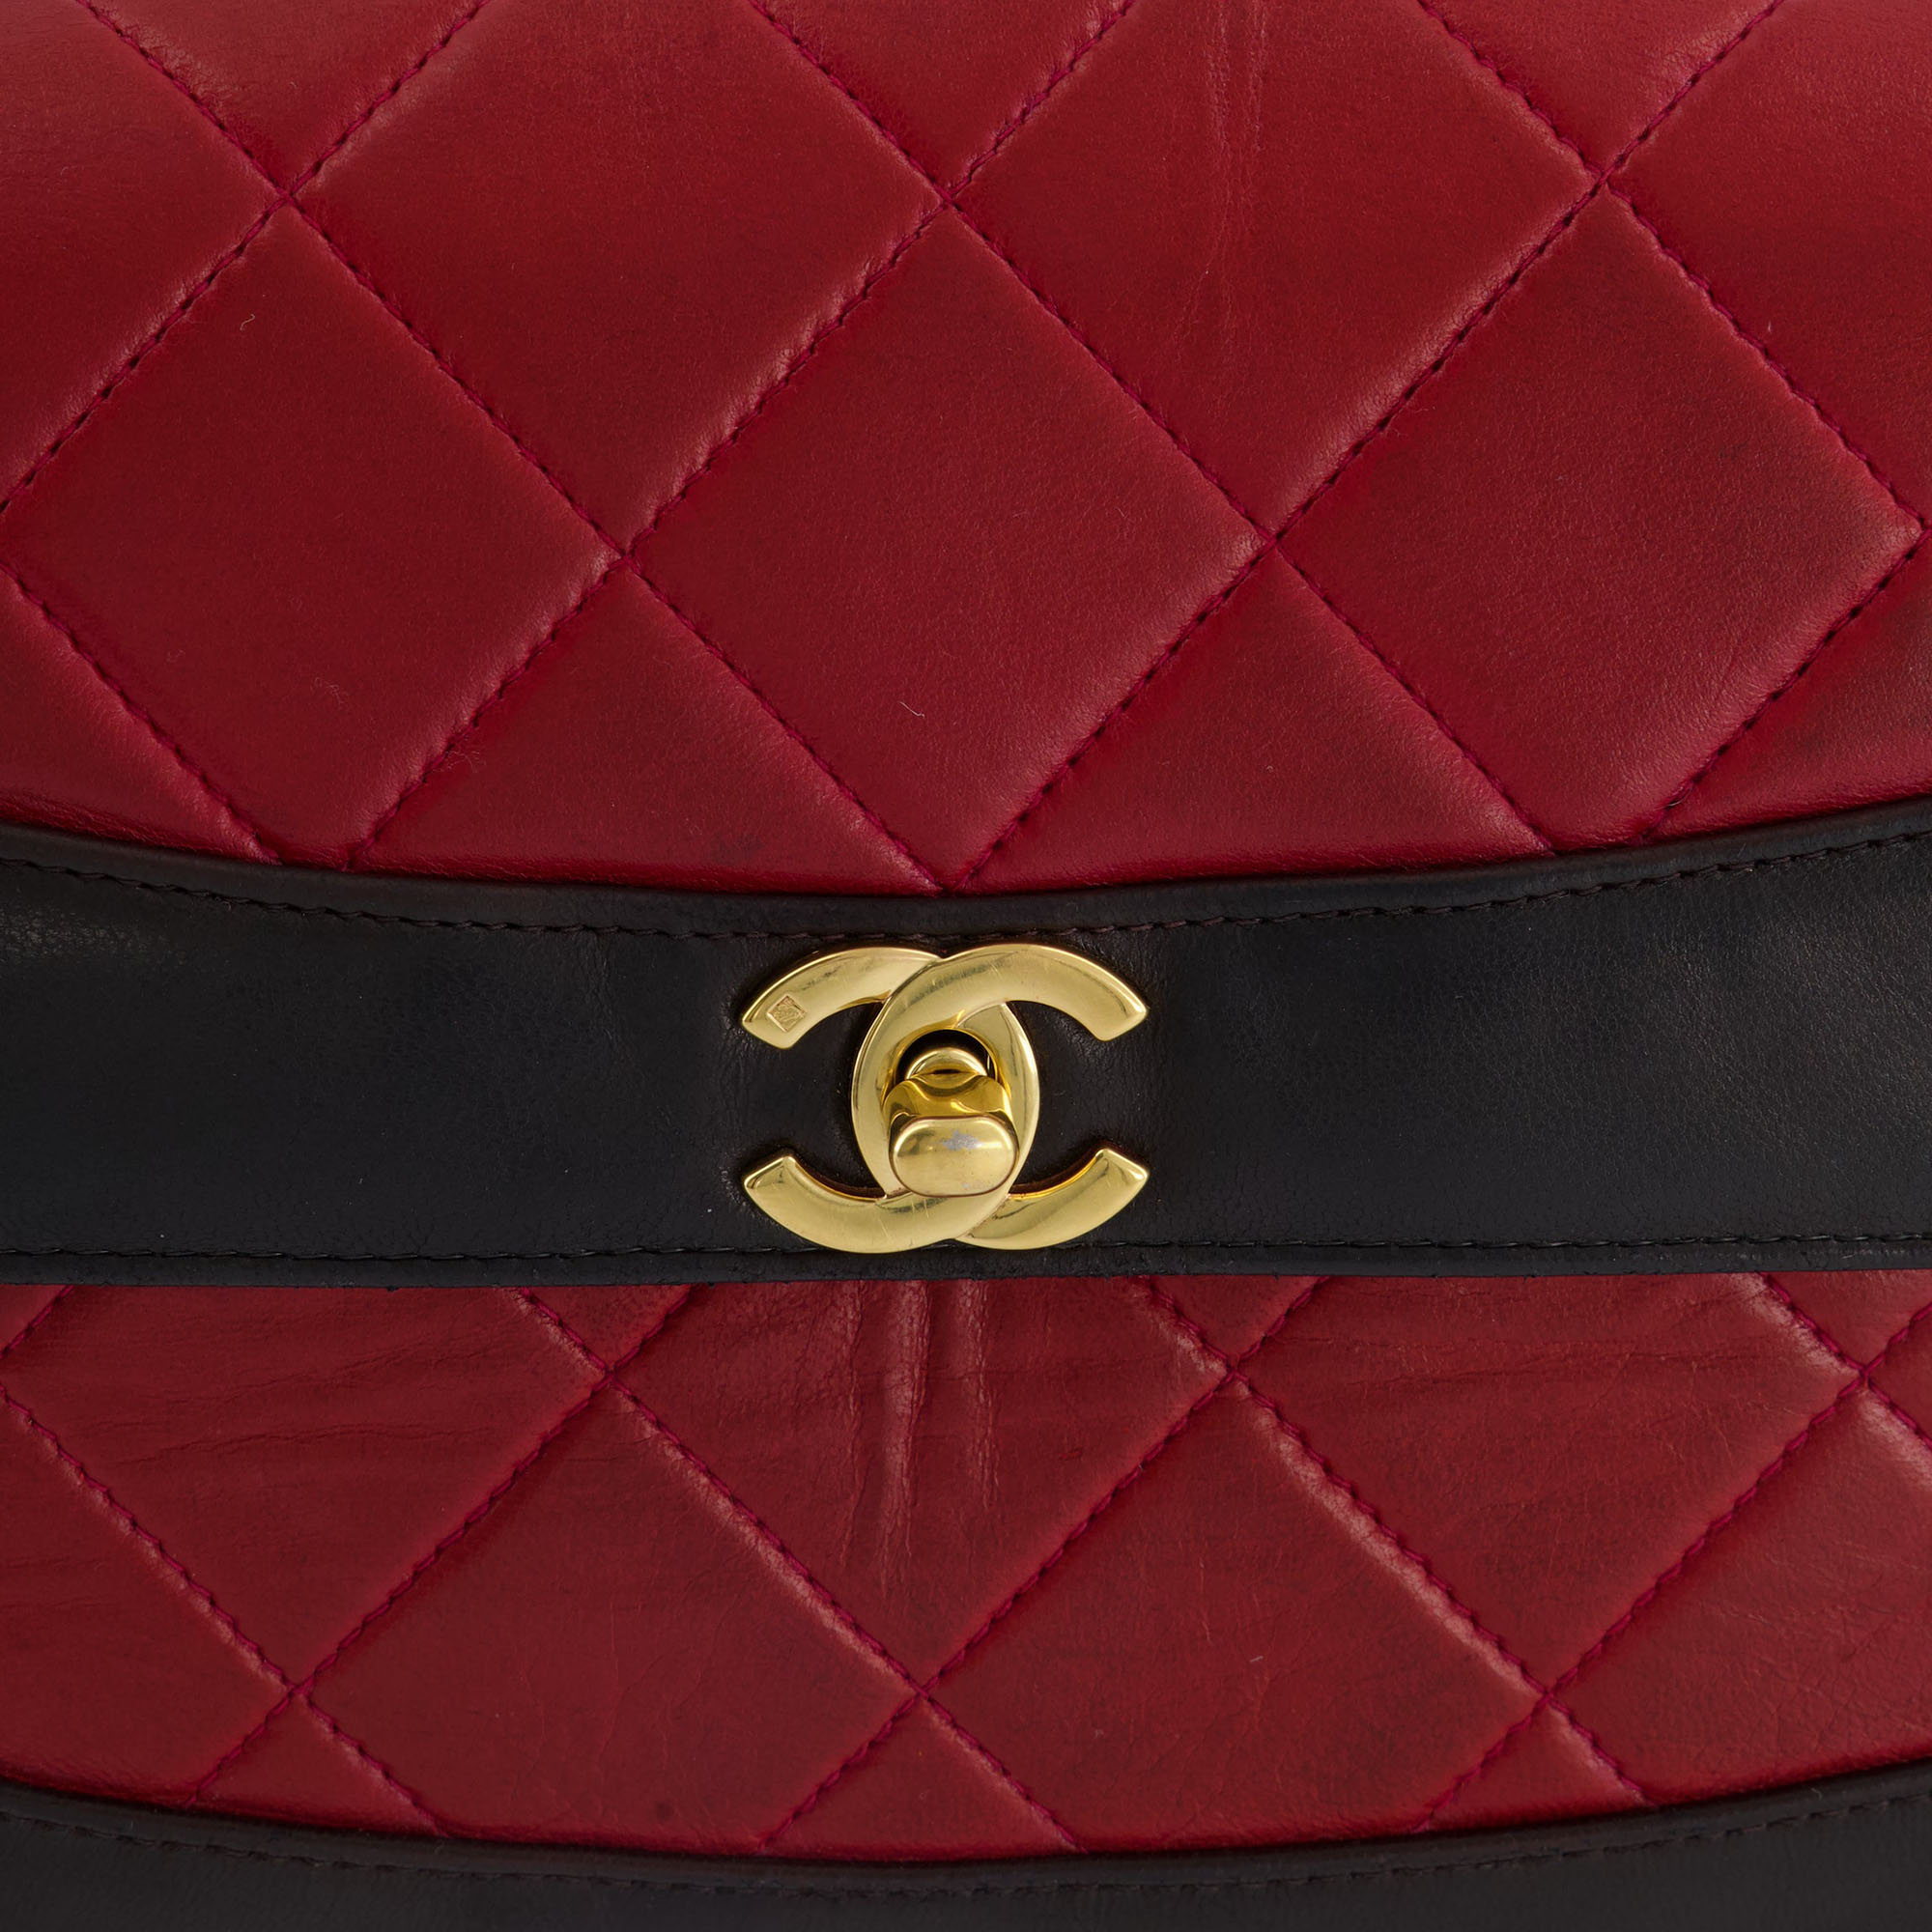 Chanel Vintage Black And Red Lambskin Border Single Flap Bag With Knot Handle & 24k Gold Hardware